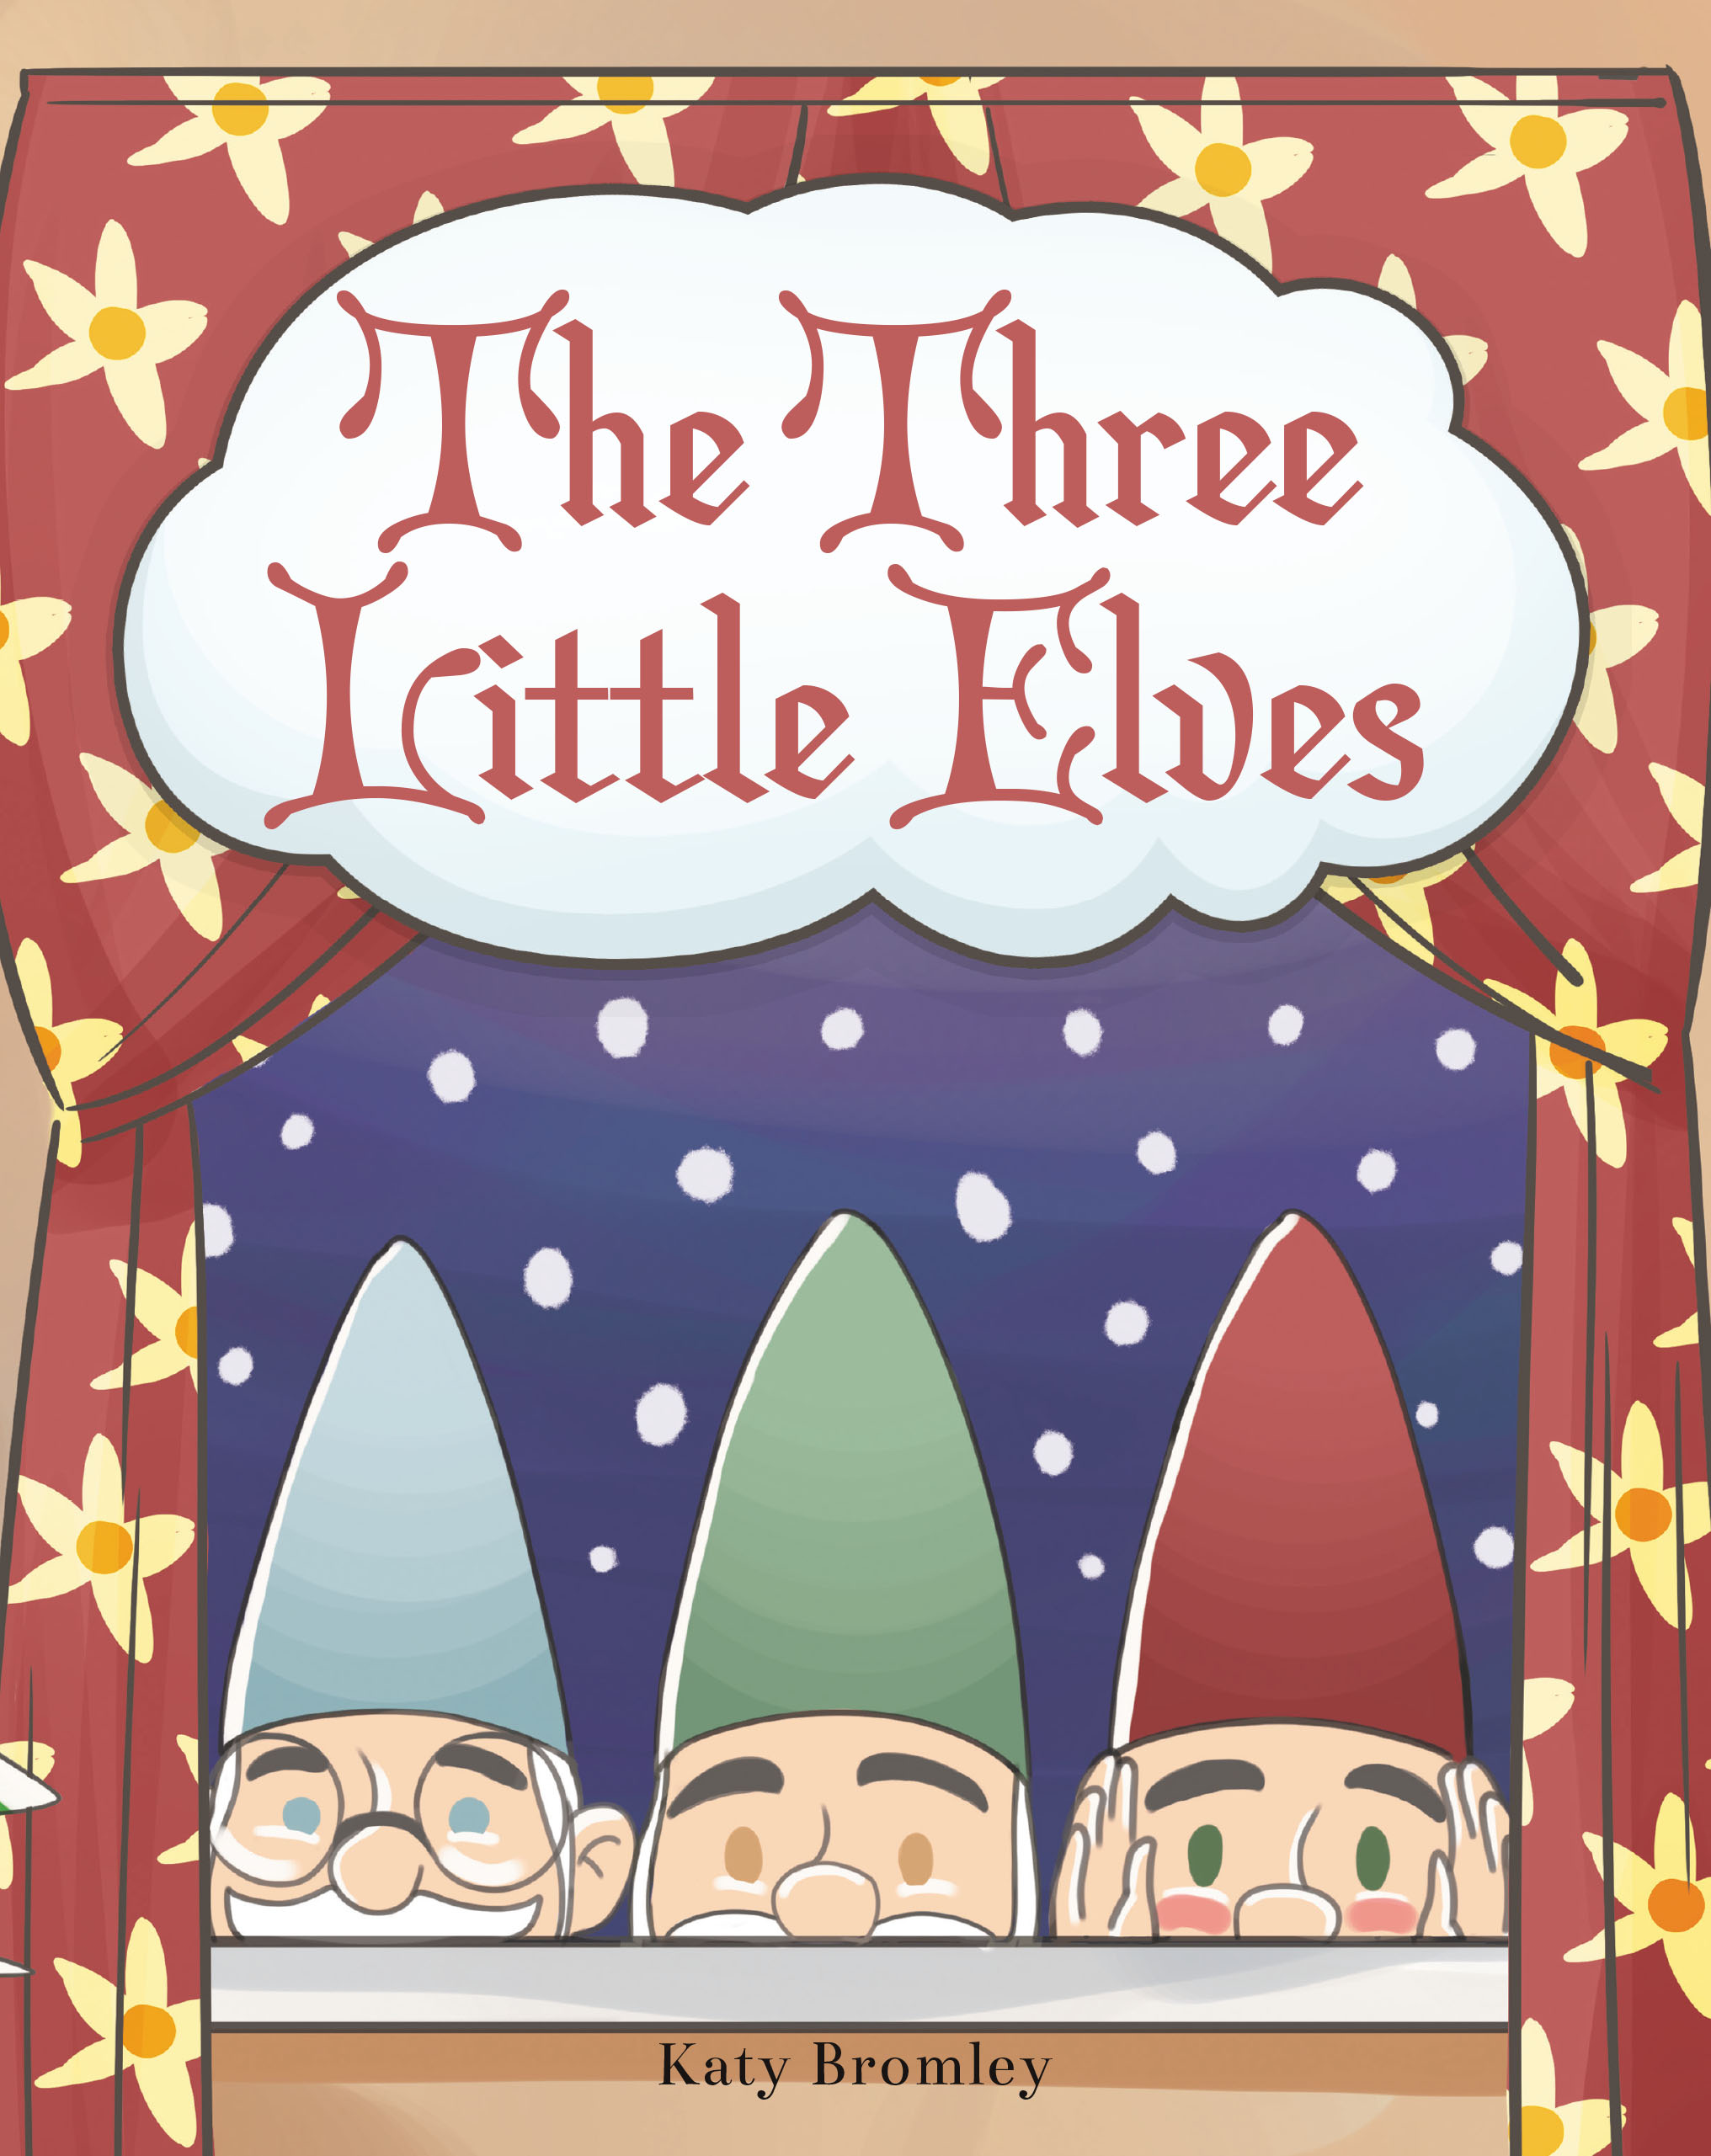 Katy Bromley’s New Book, "The Three Little Elves," Follows the Adventures of Three Important Elves Who Help Santa Watch Over Children's Behavior During Christmastime